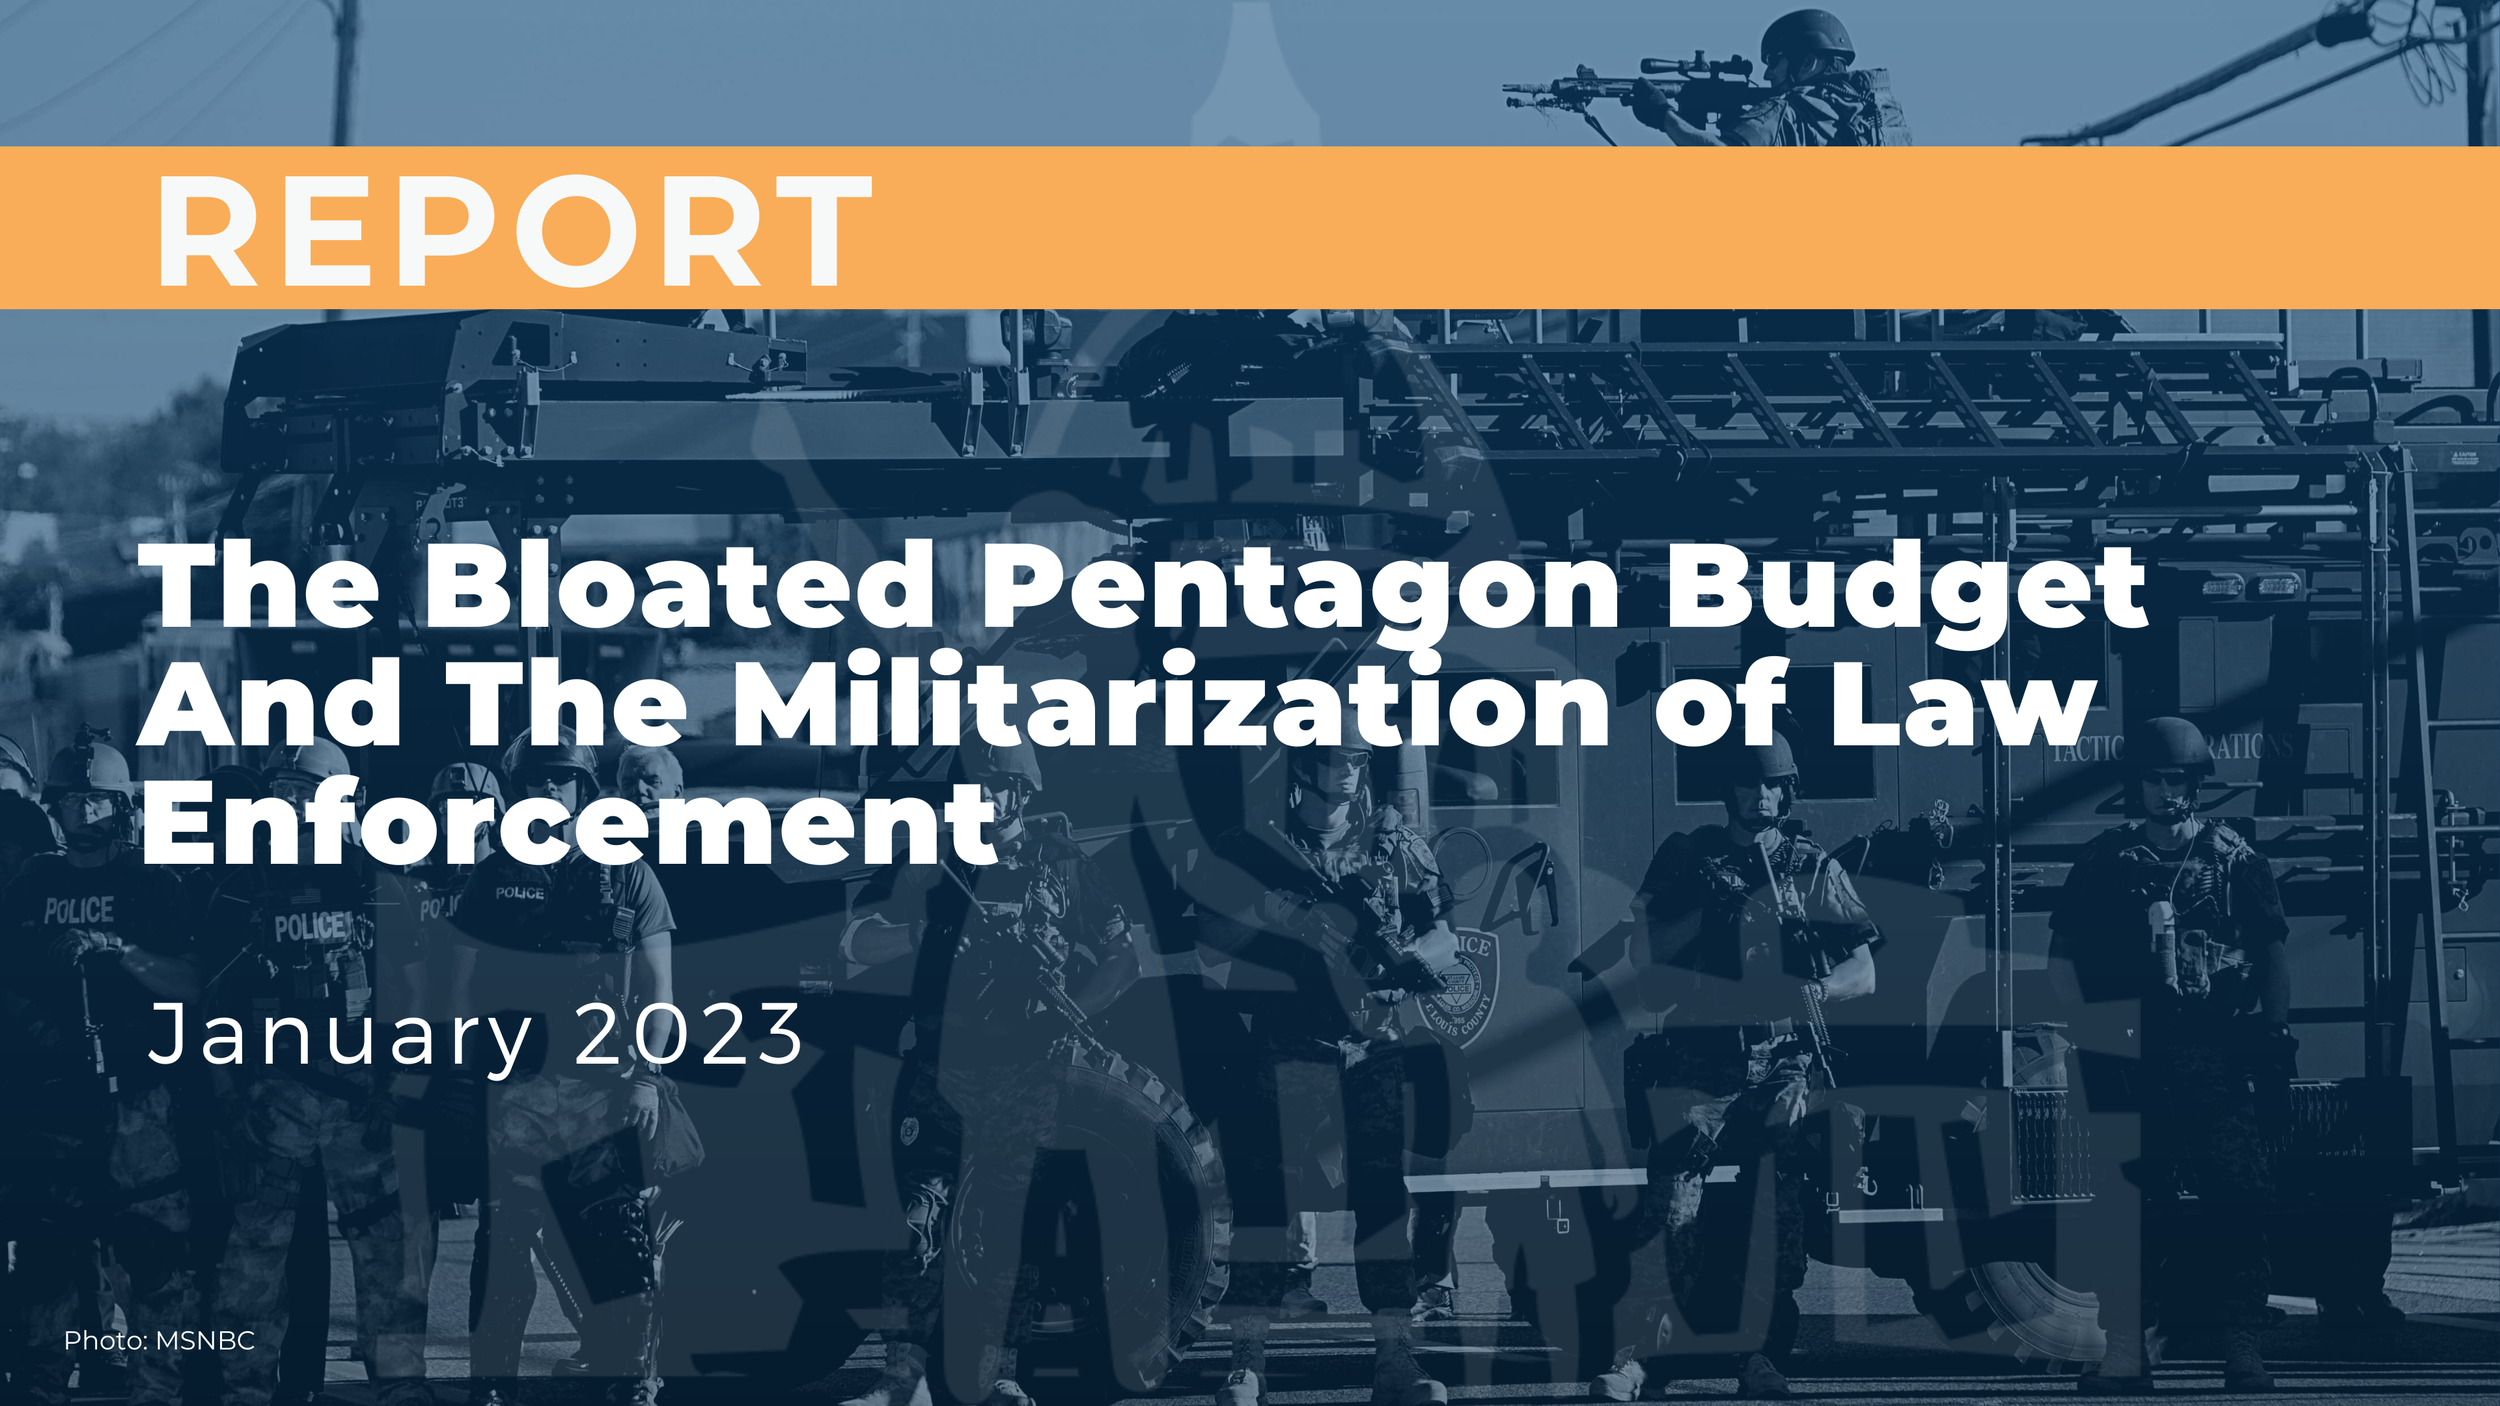 The Bloated Pentagon Budget and the Militarization of Law Enforcement